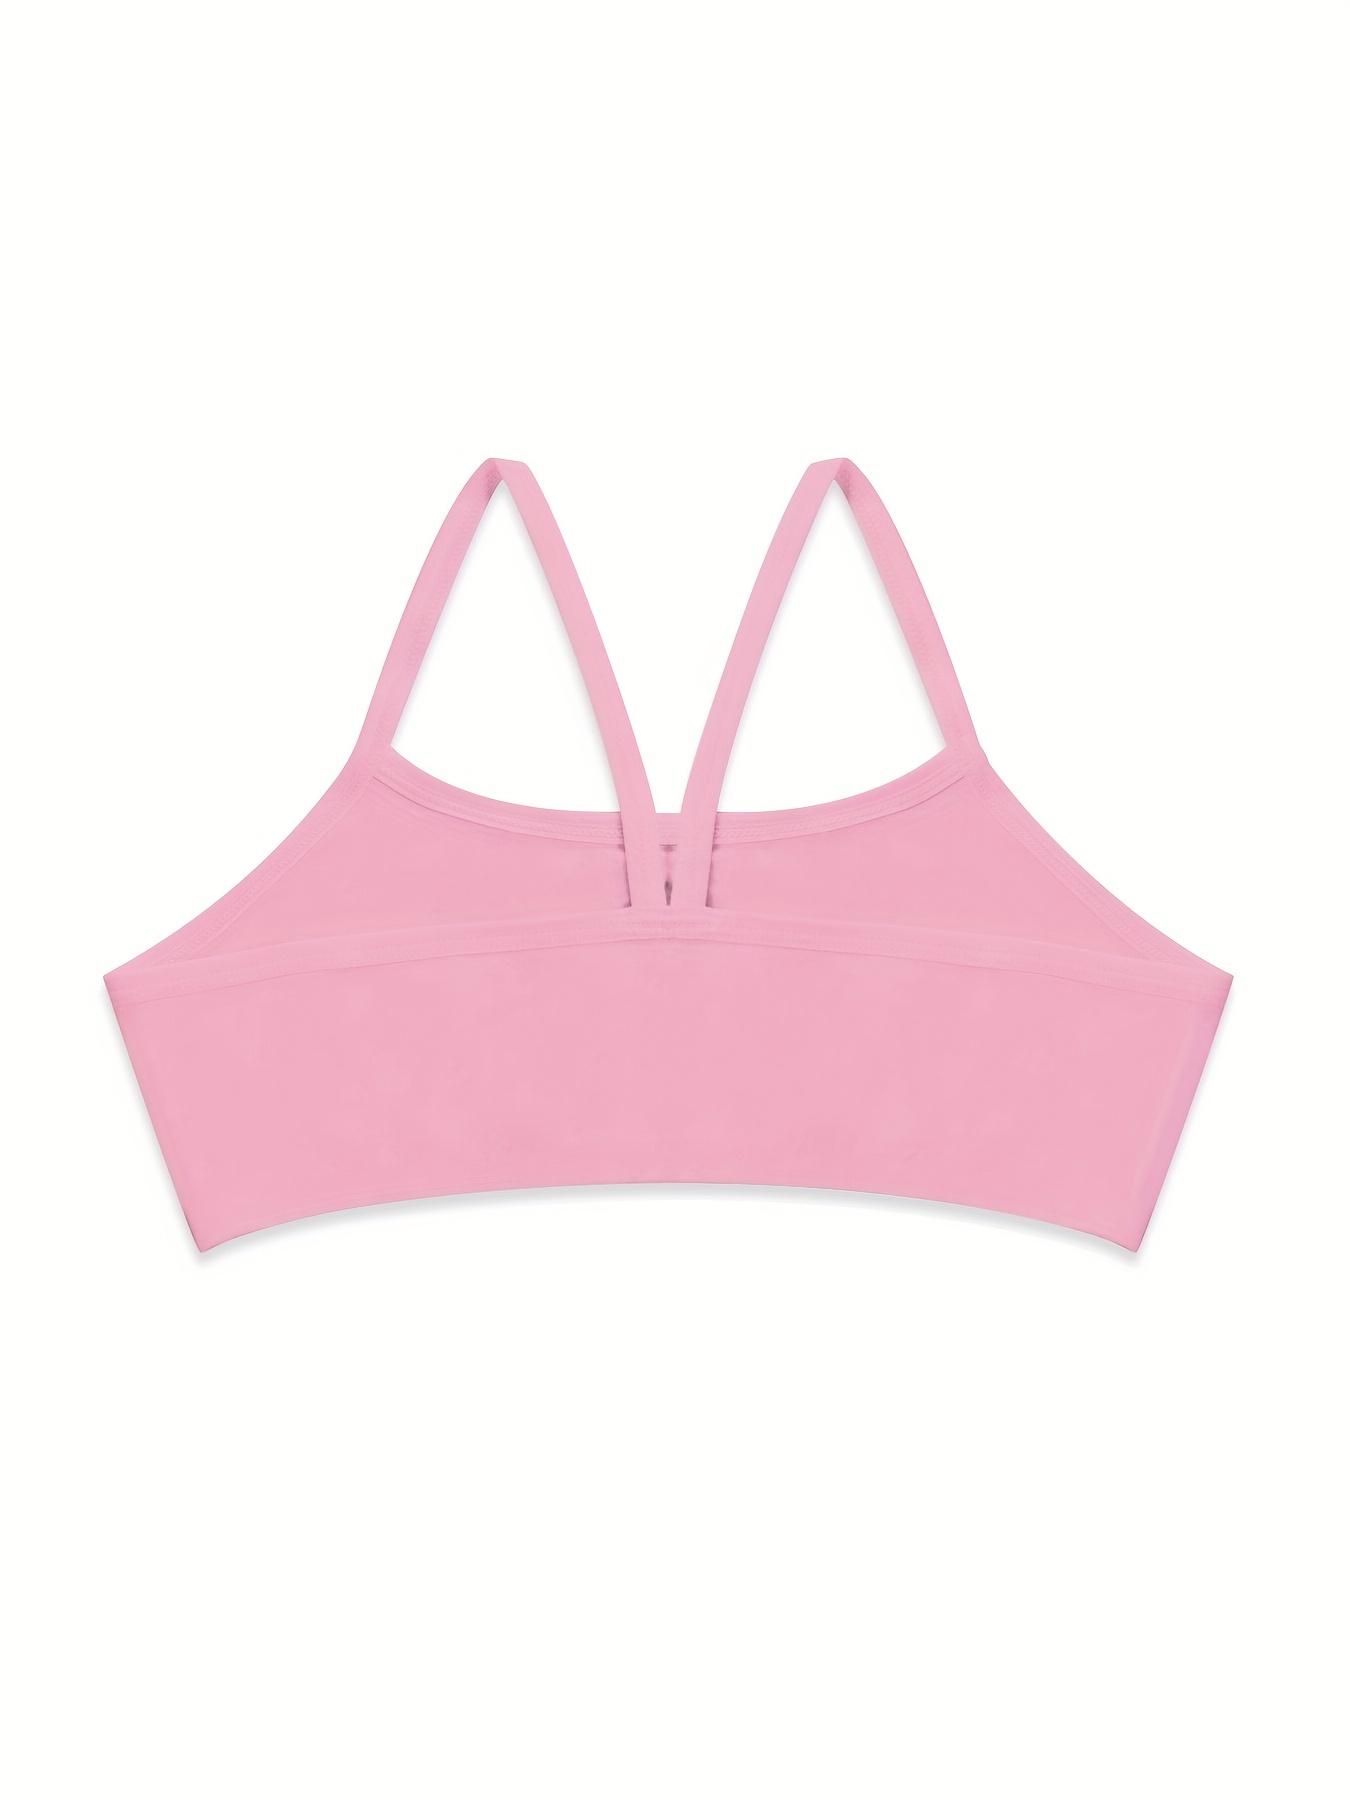 Hanes Strappy Sports Bra in pink, white, black Size Large